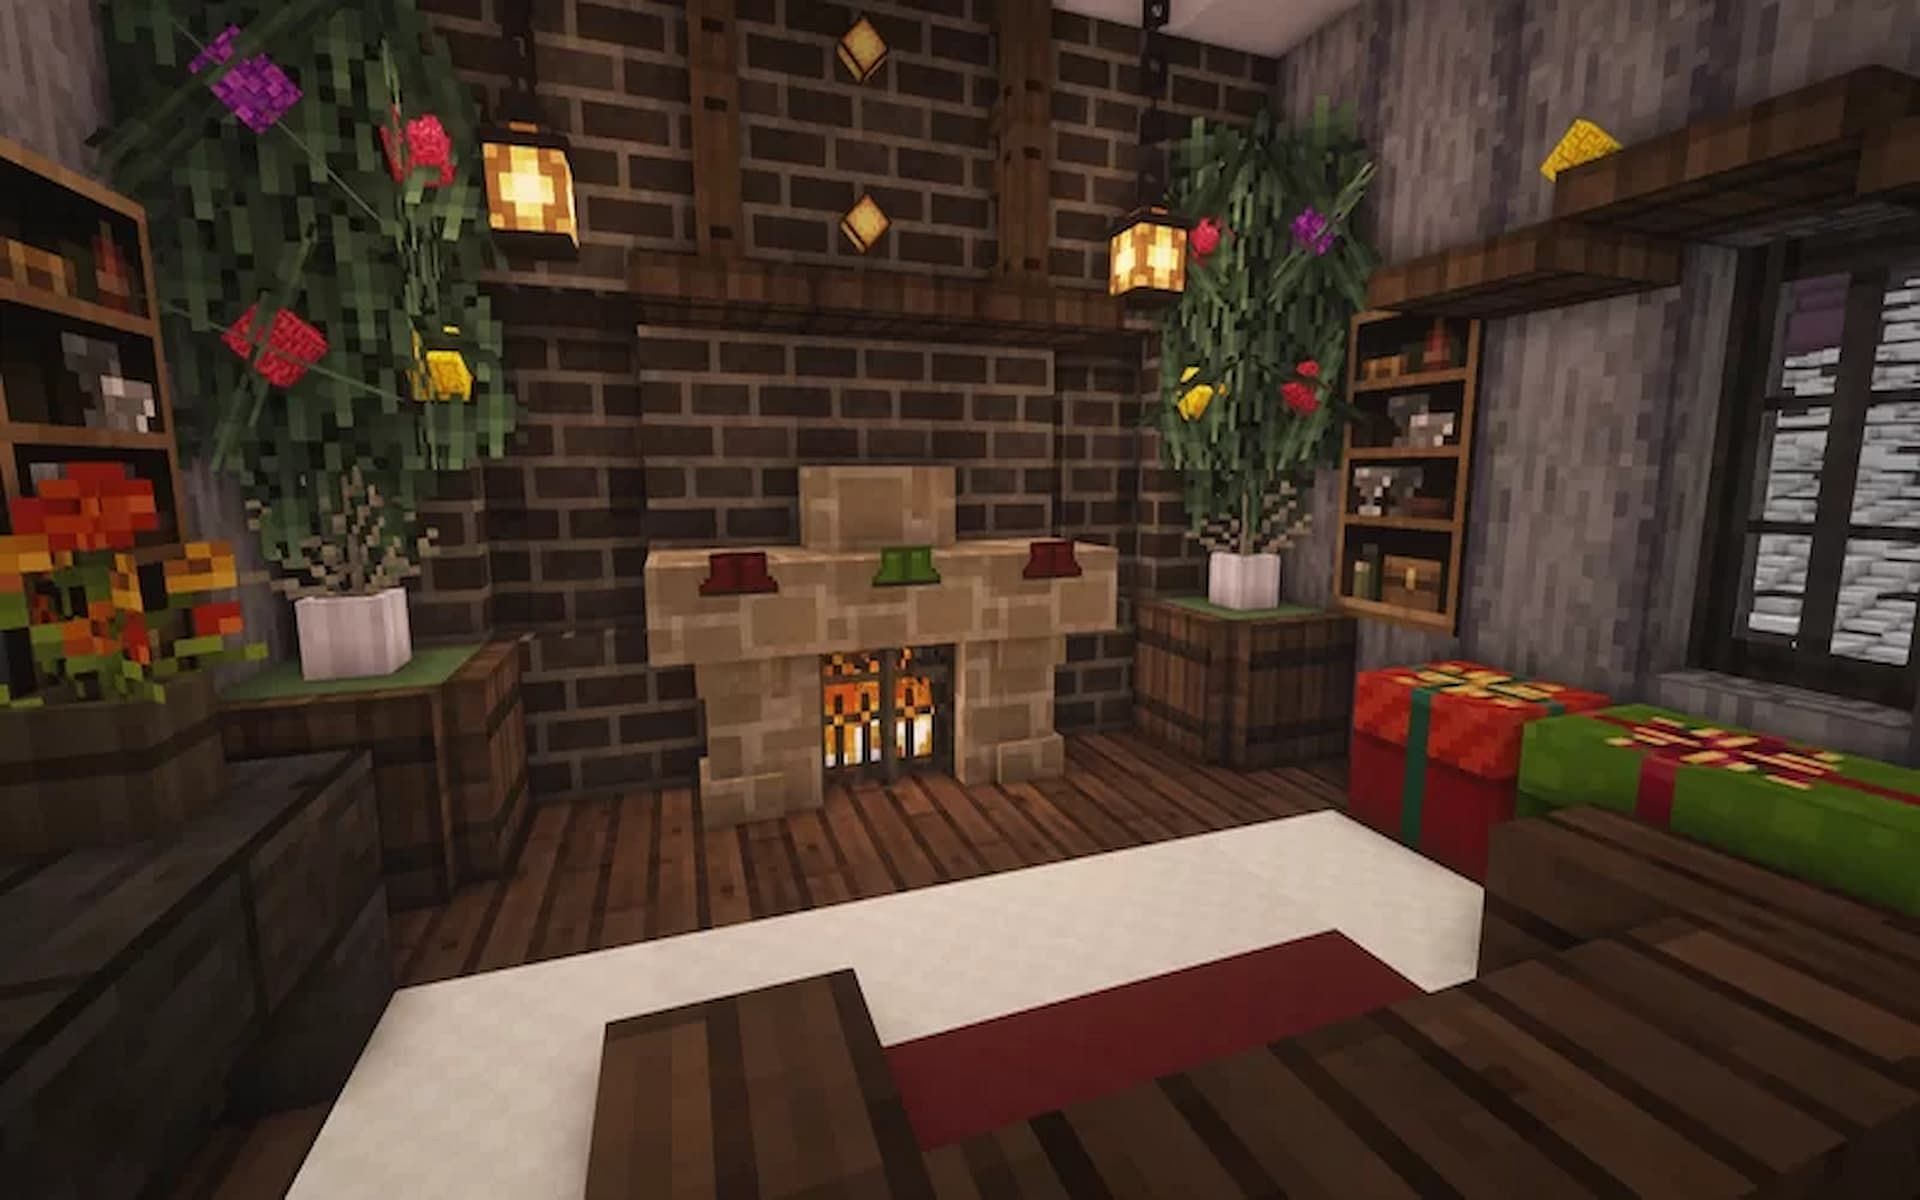 Players are able to make a fireplace to decorate their home or base (Image via Planet Minecraft)